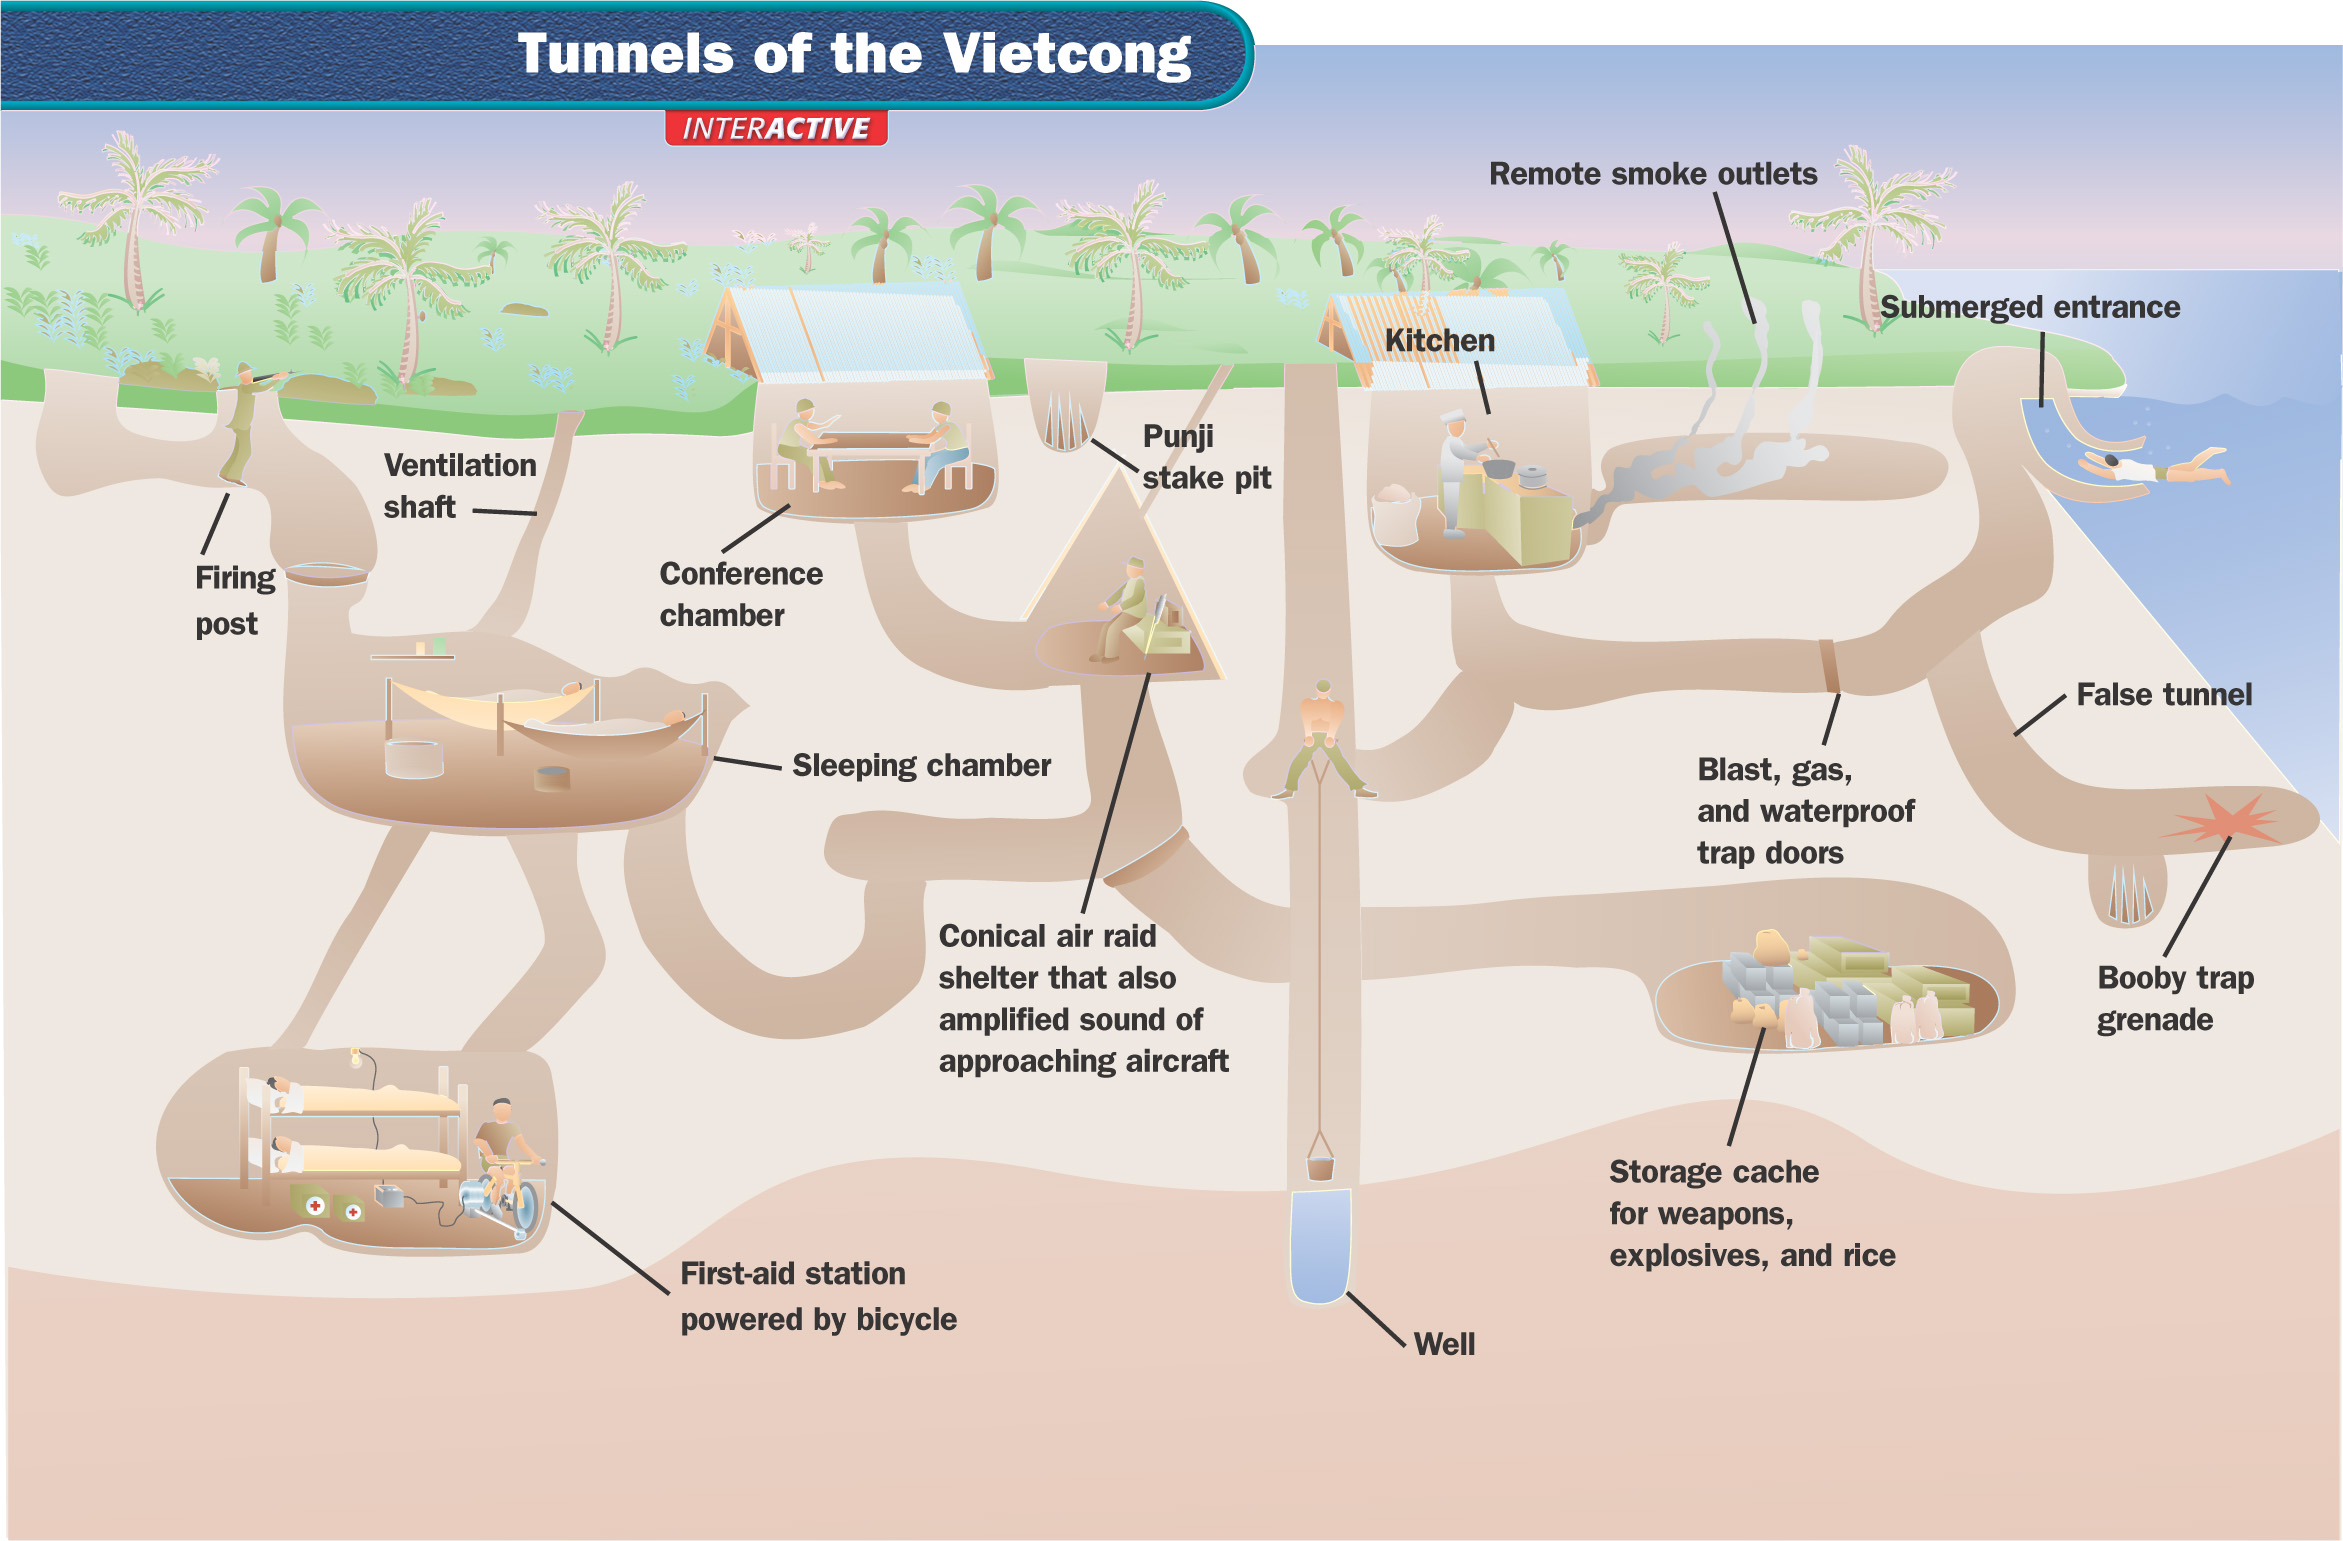 A map: Tunnels of the Vietcong. The map shows an underwater entrance leading to a web of tunnels with its own water well, kitchen, sleeping chambers and storage cache.